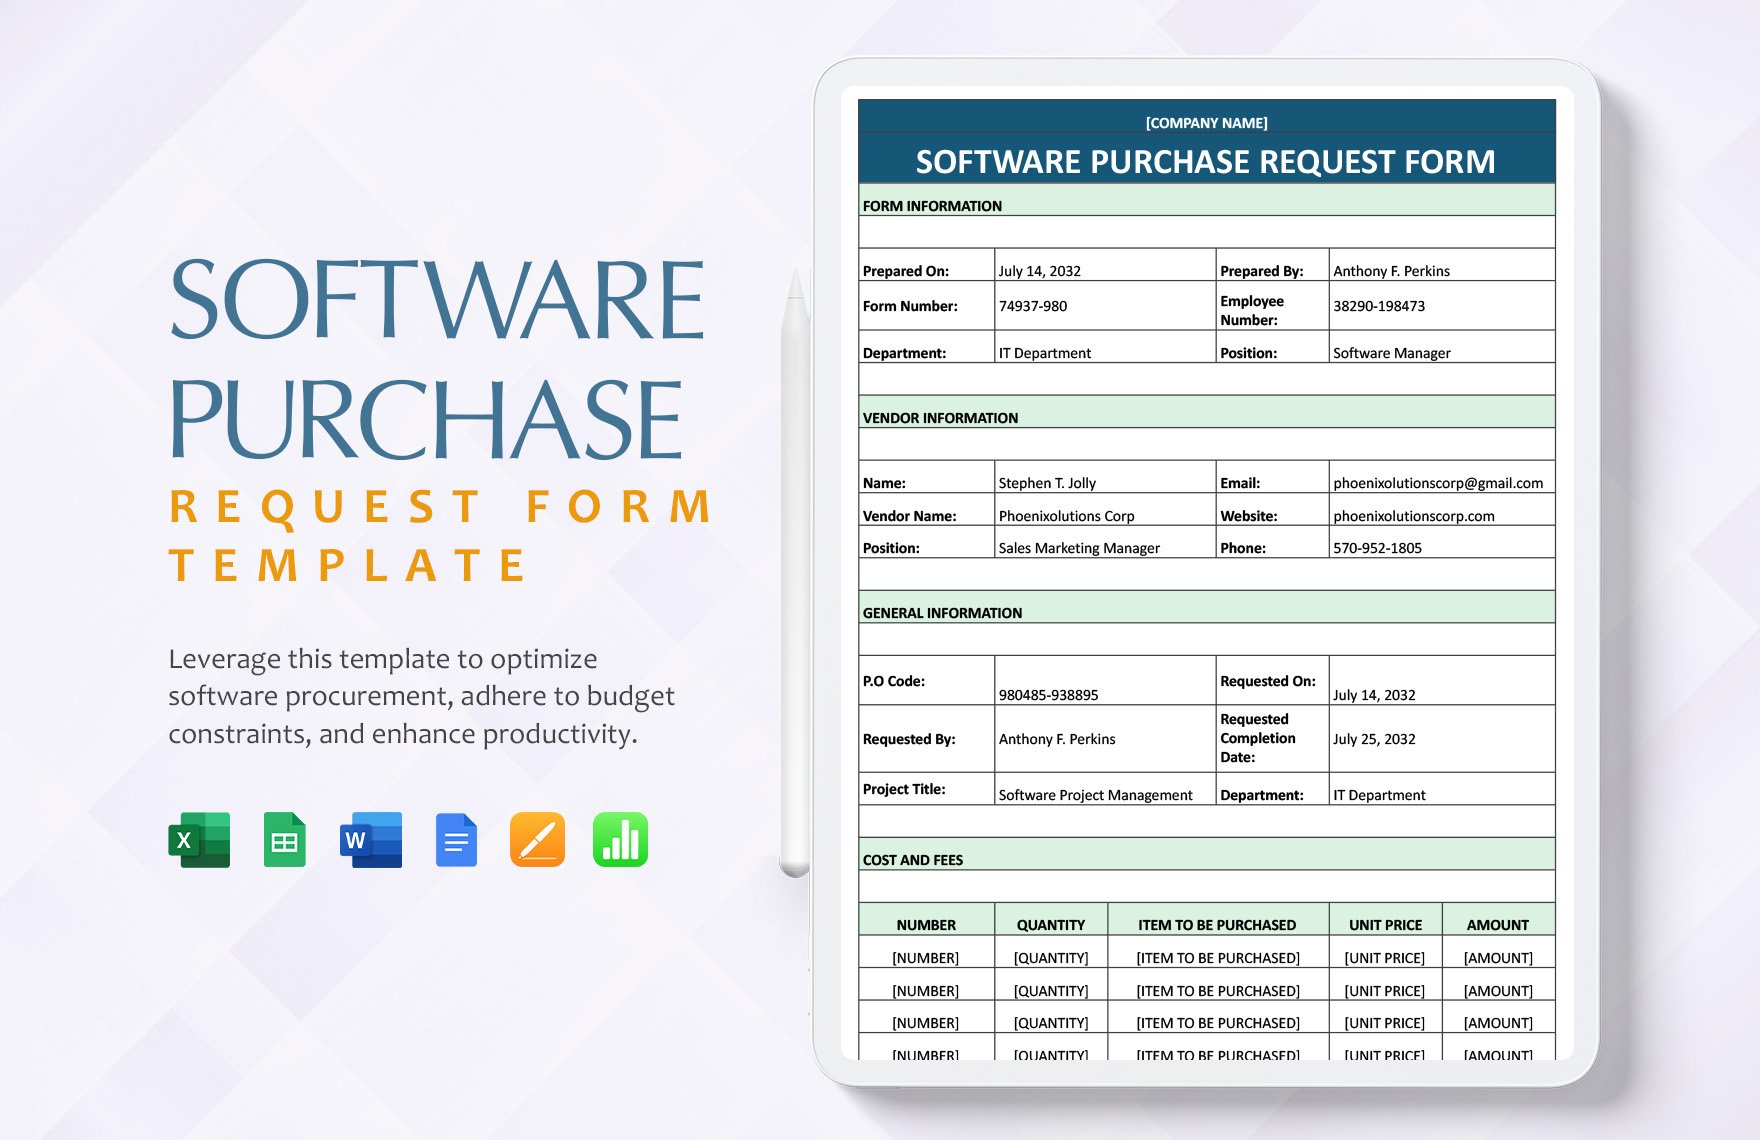 Software Purchase Request Form Template in Word, Google Docs, Excel, Google Sheets, Apple Pages, Apple Numbers